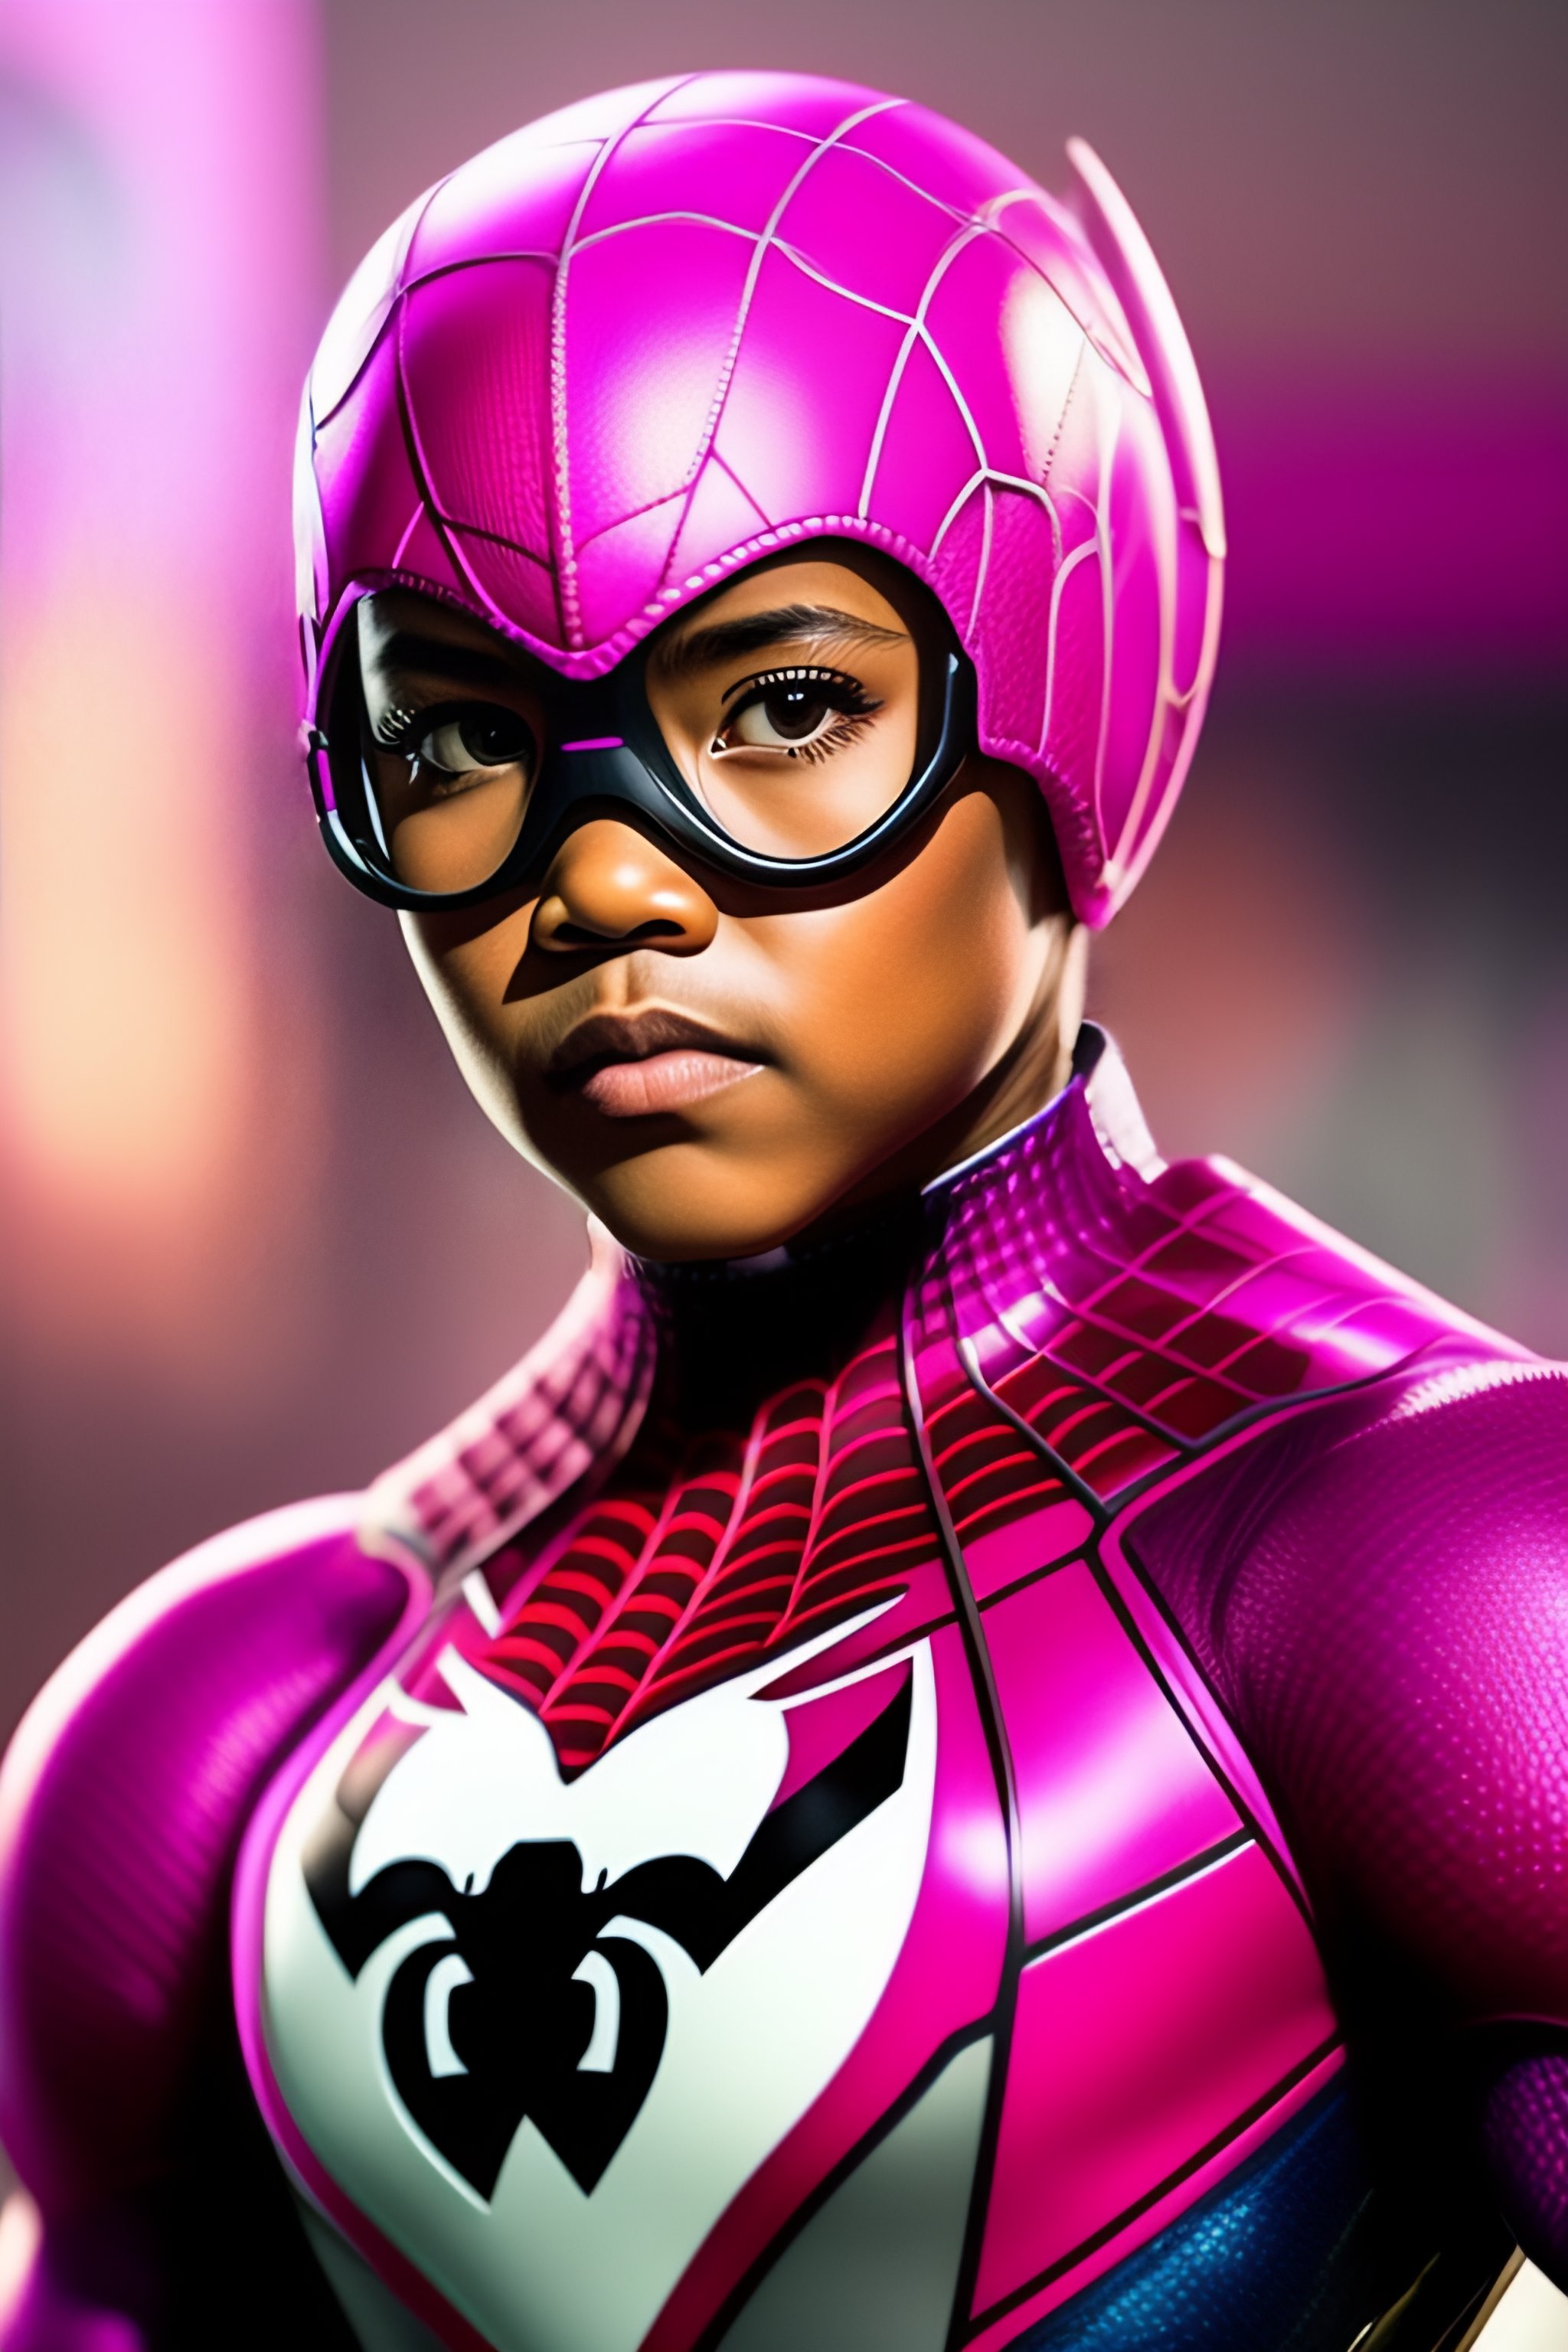 Lexica - Pink spiderman